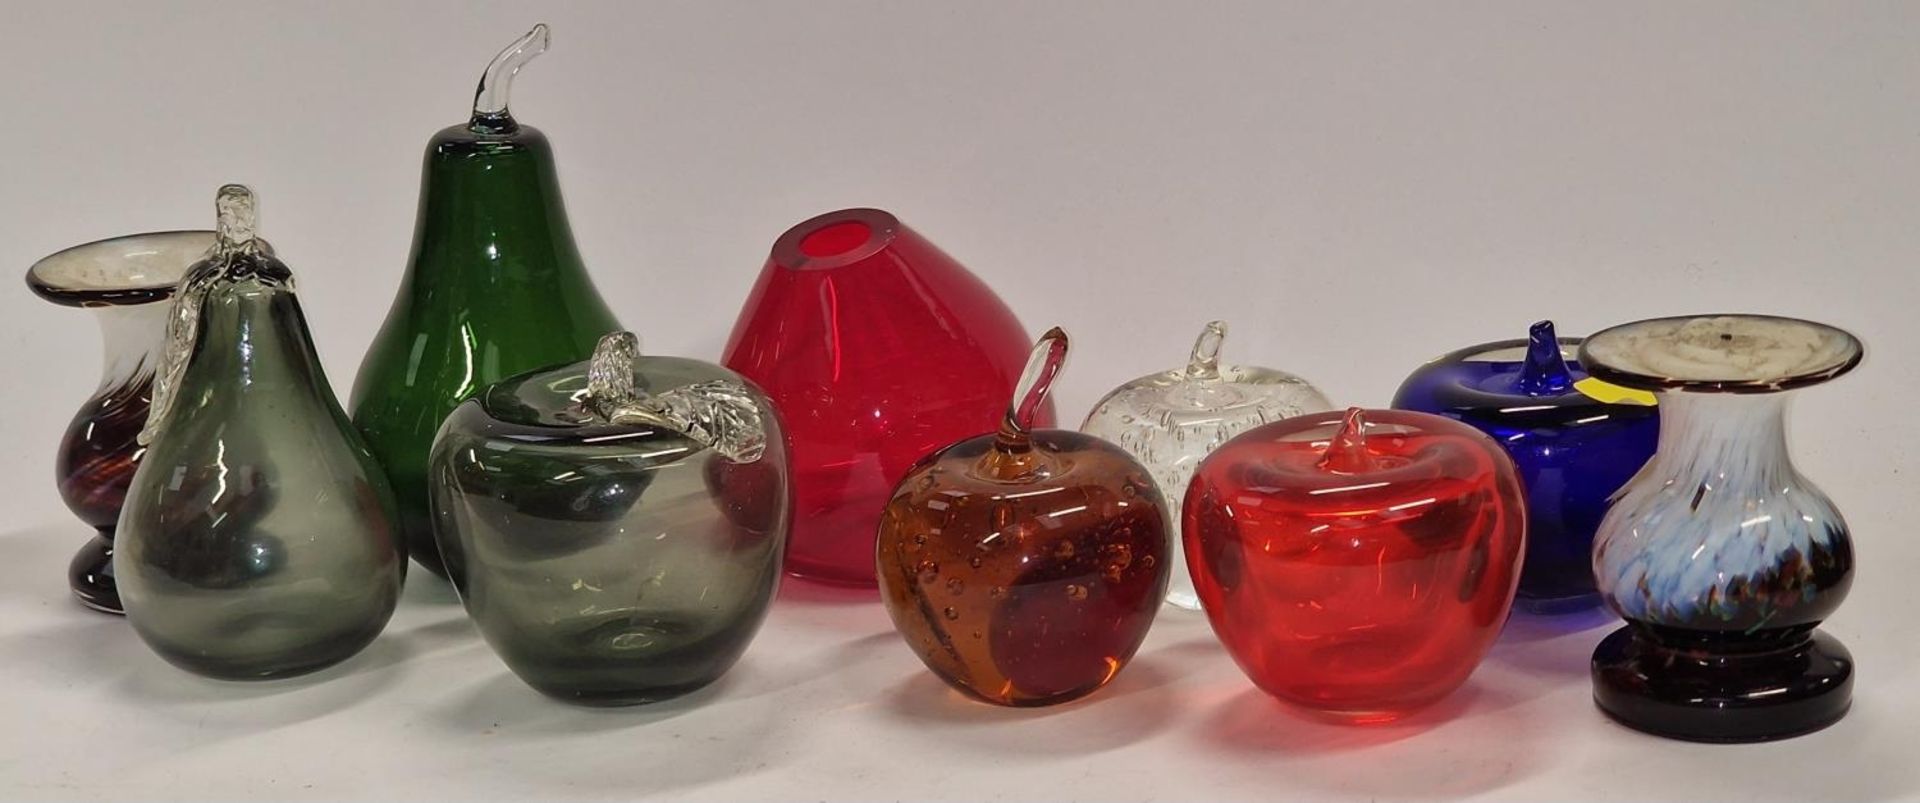 A collection of coloured glass fruits together with a pair of glass candlesticks.